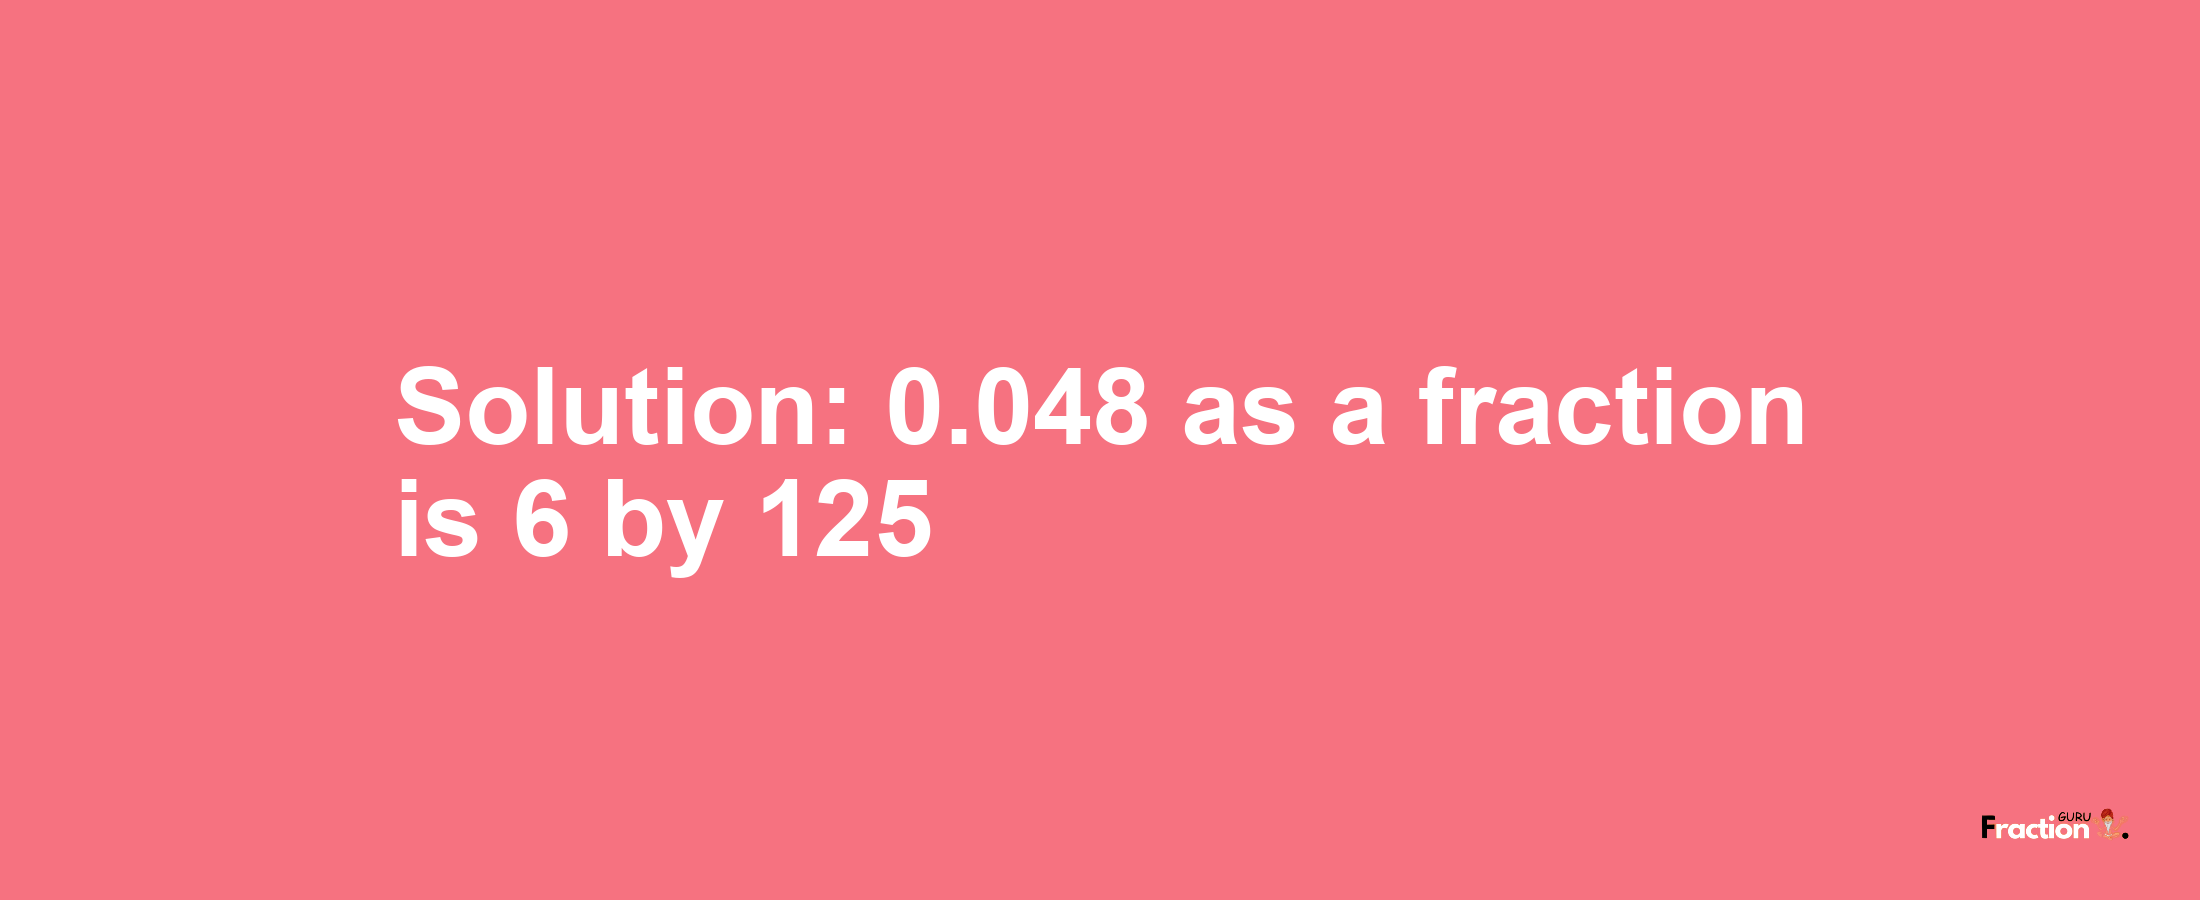 Solution:0.048 as a fraction is 6/125